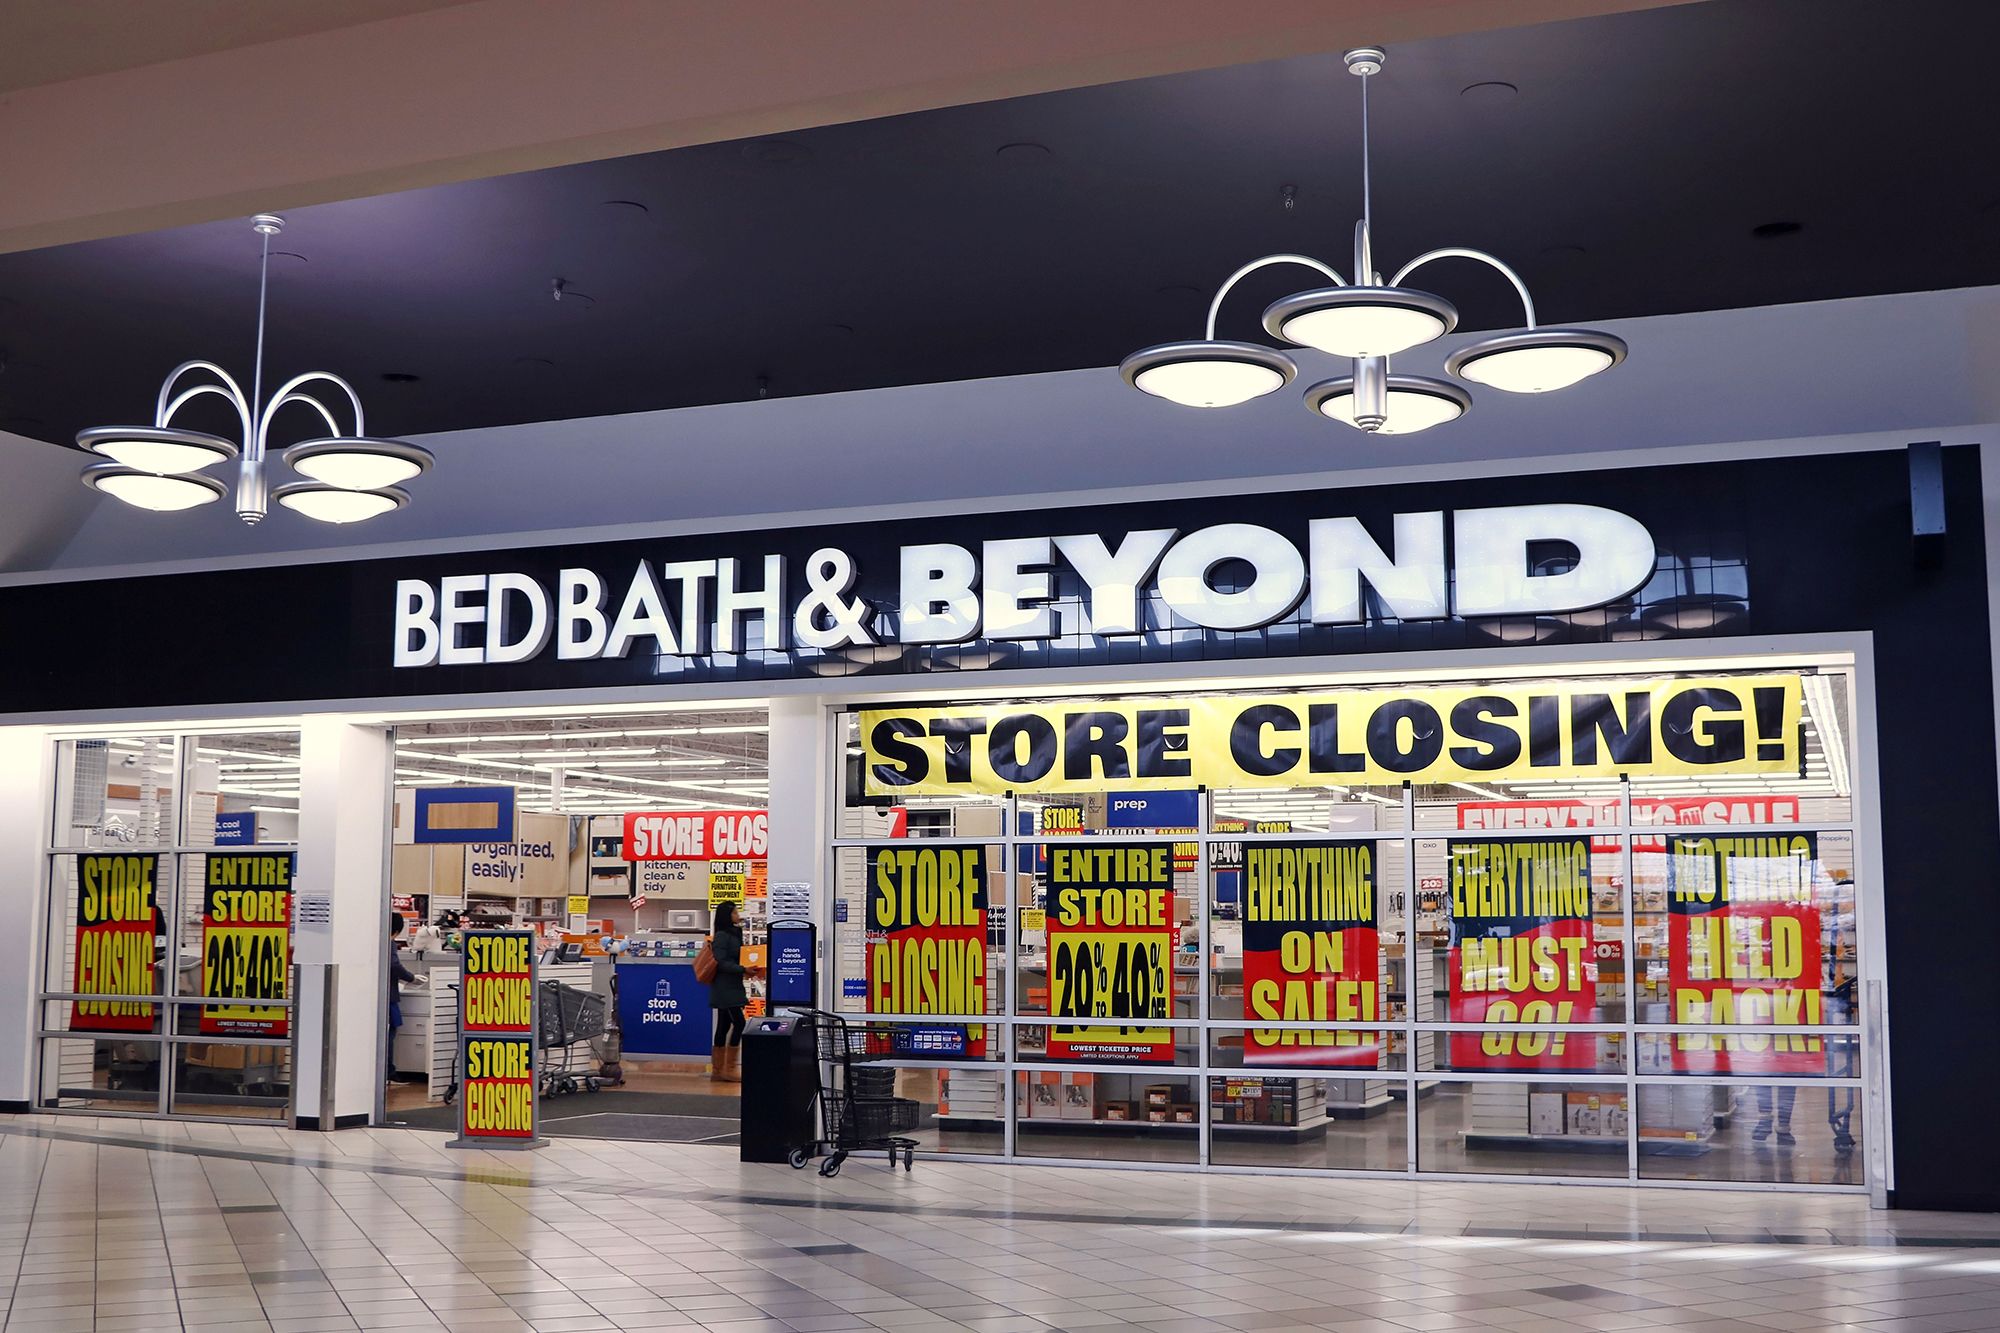 Bed Bath and Beyond Logo and symbol, meaning, history, PNG, brand